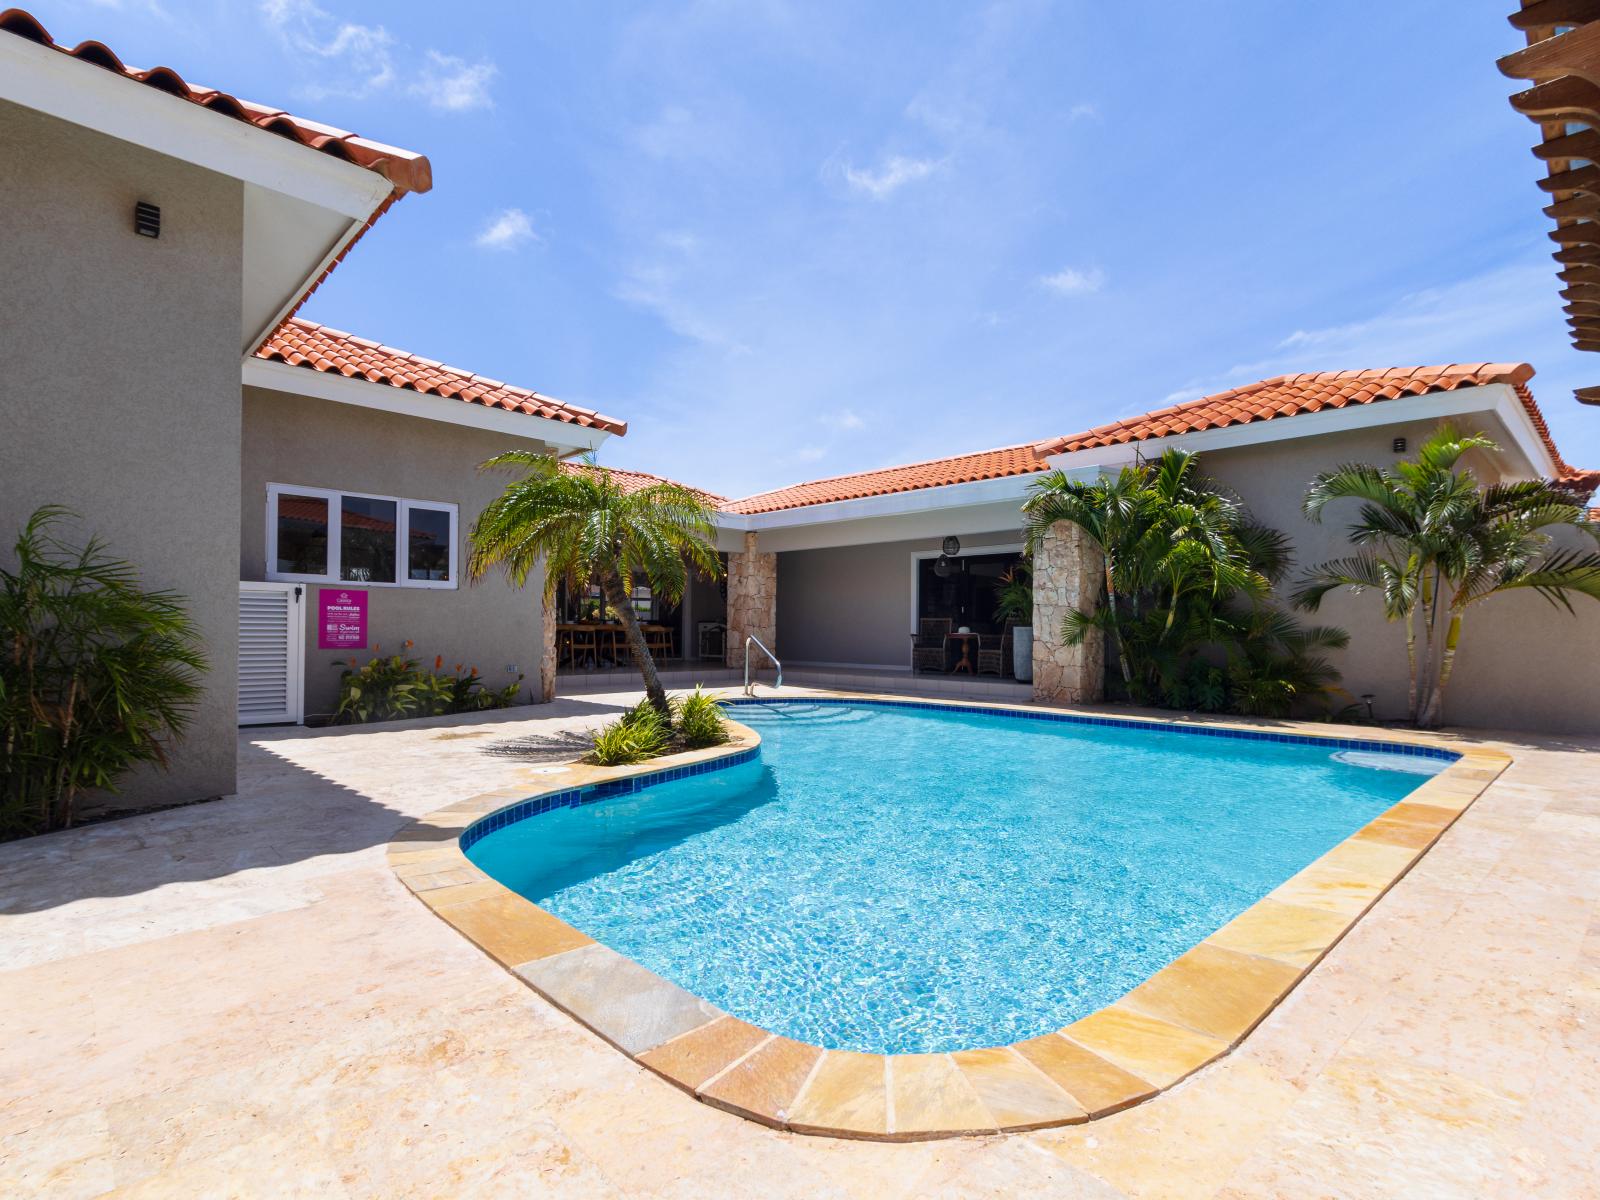 Splendid Pool of the Apartment in Noord Aruba - Dive into refreshing poolside escape - Lounge in tranquility by the sparkling waters - Immerse yourself in the cool elegance of our pool - Experience ultimate relaxation in our poolside paradise